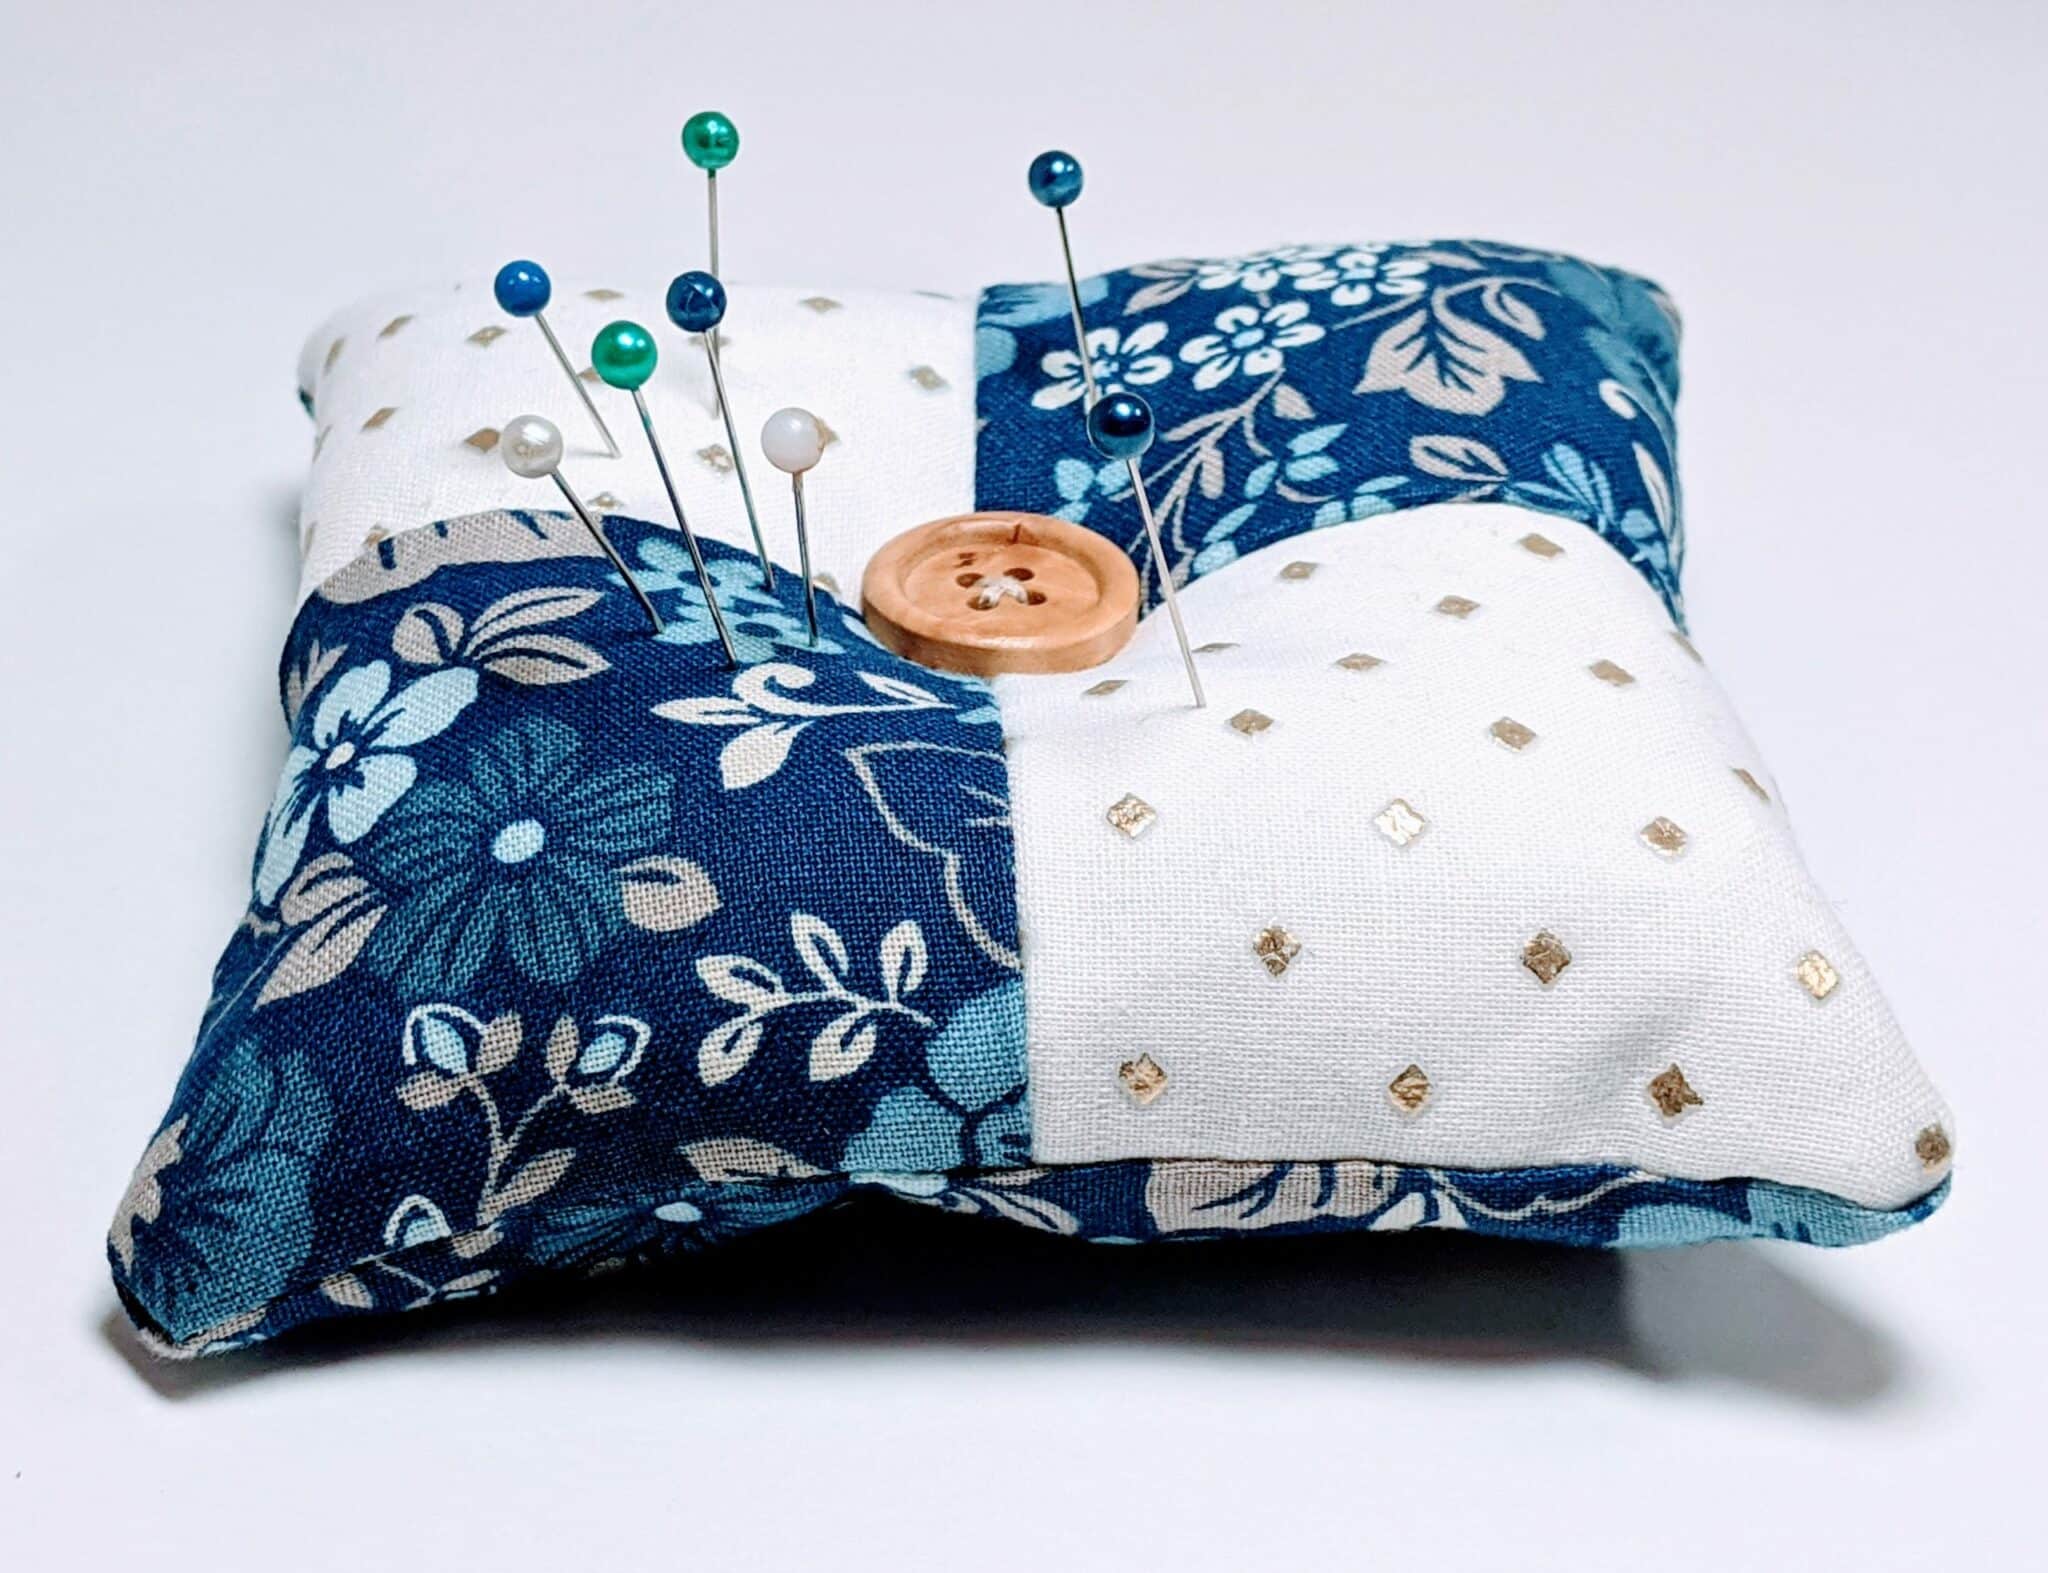 Sew a Wrist Pin Cushion - Easy Sewing For Beginners